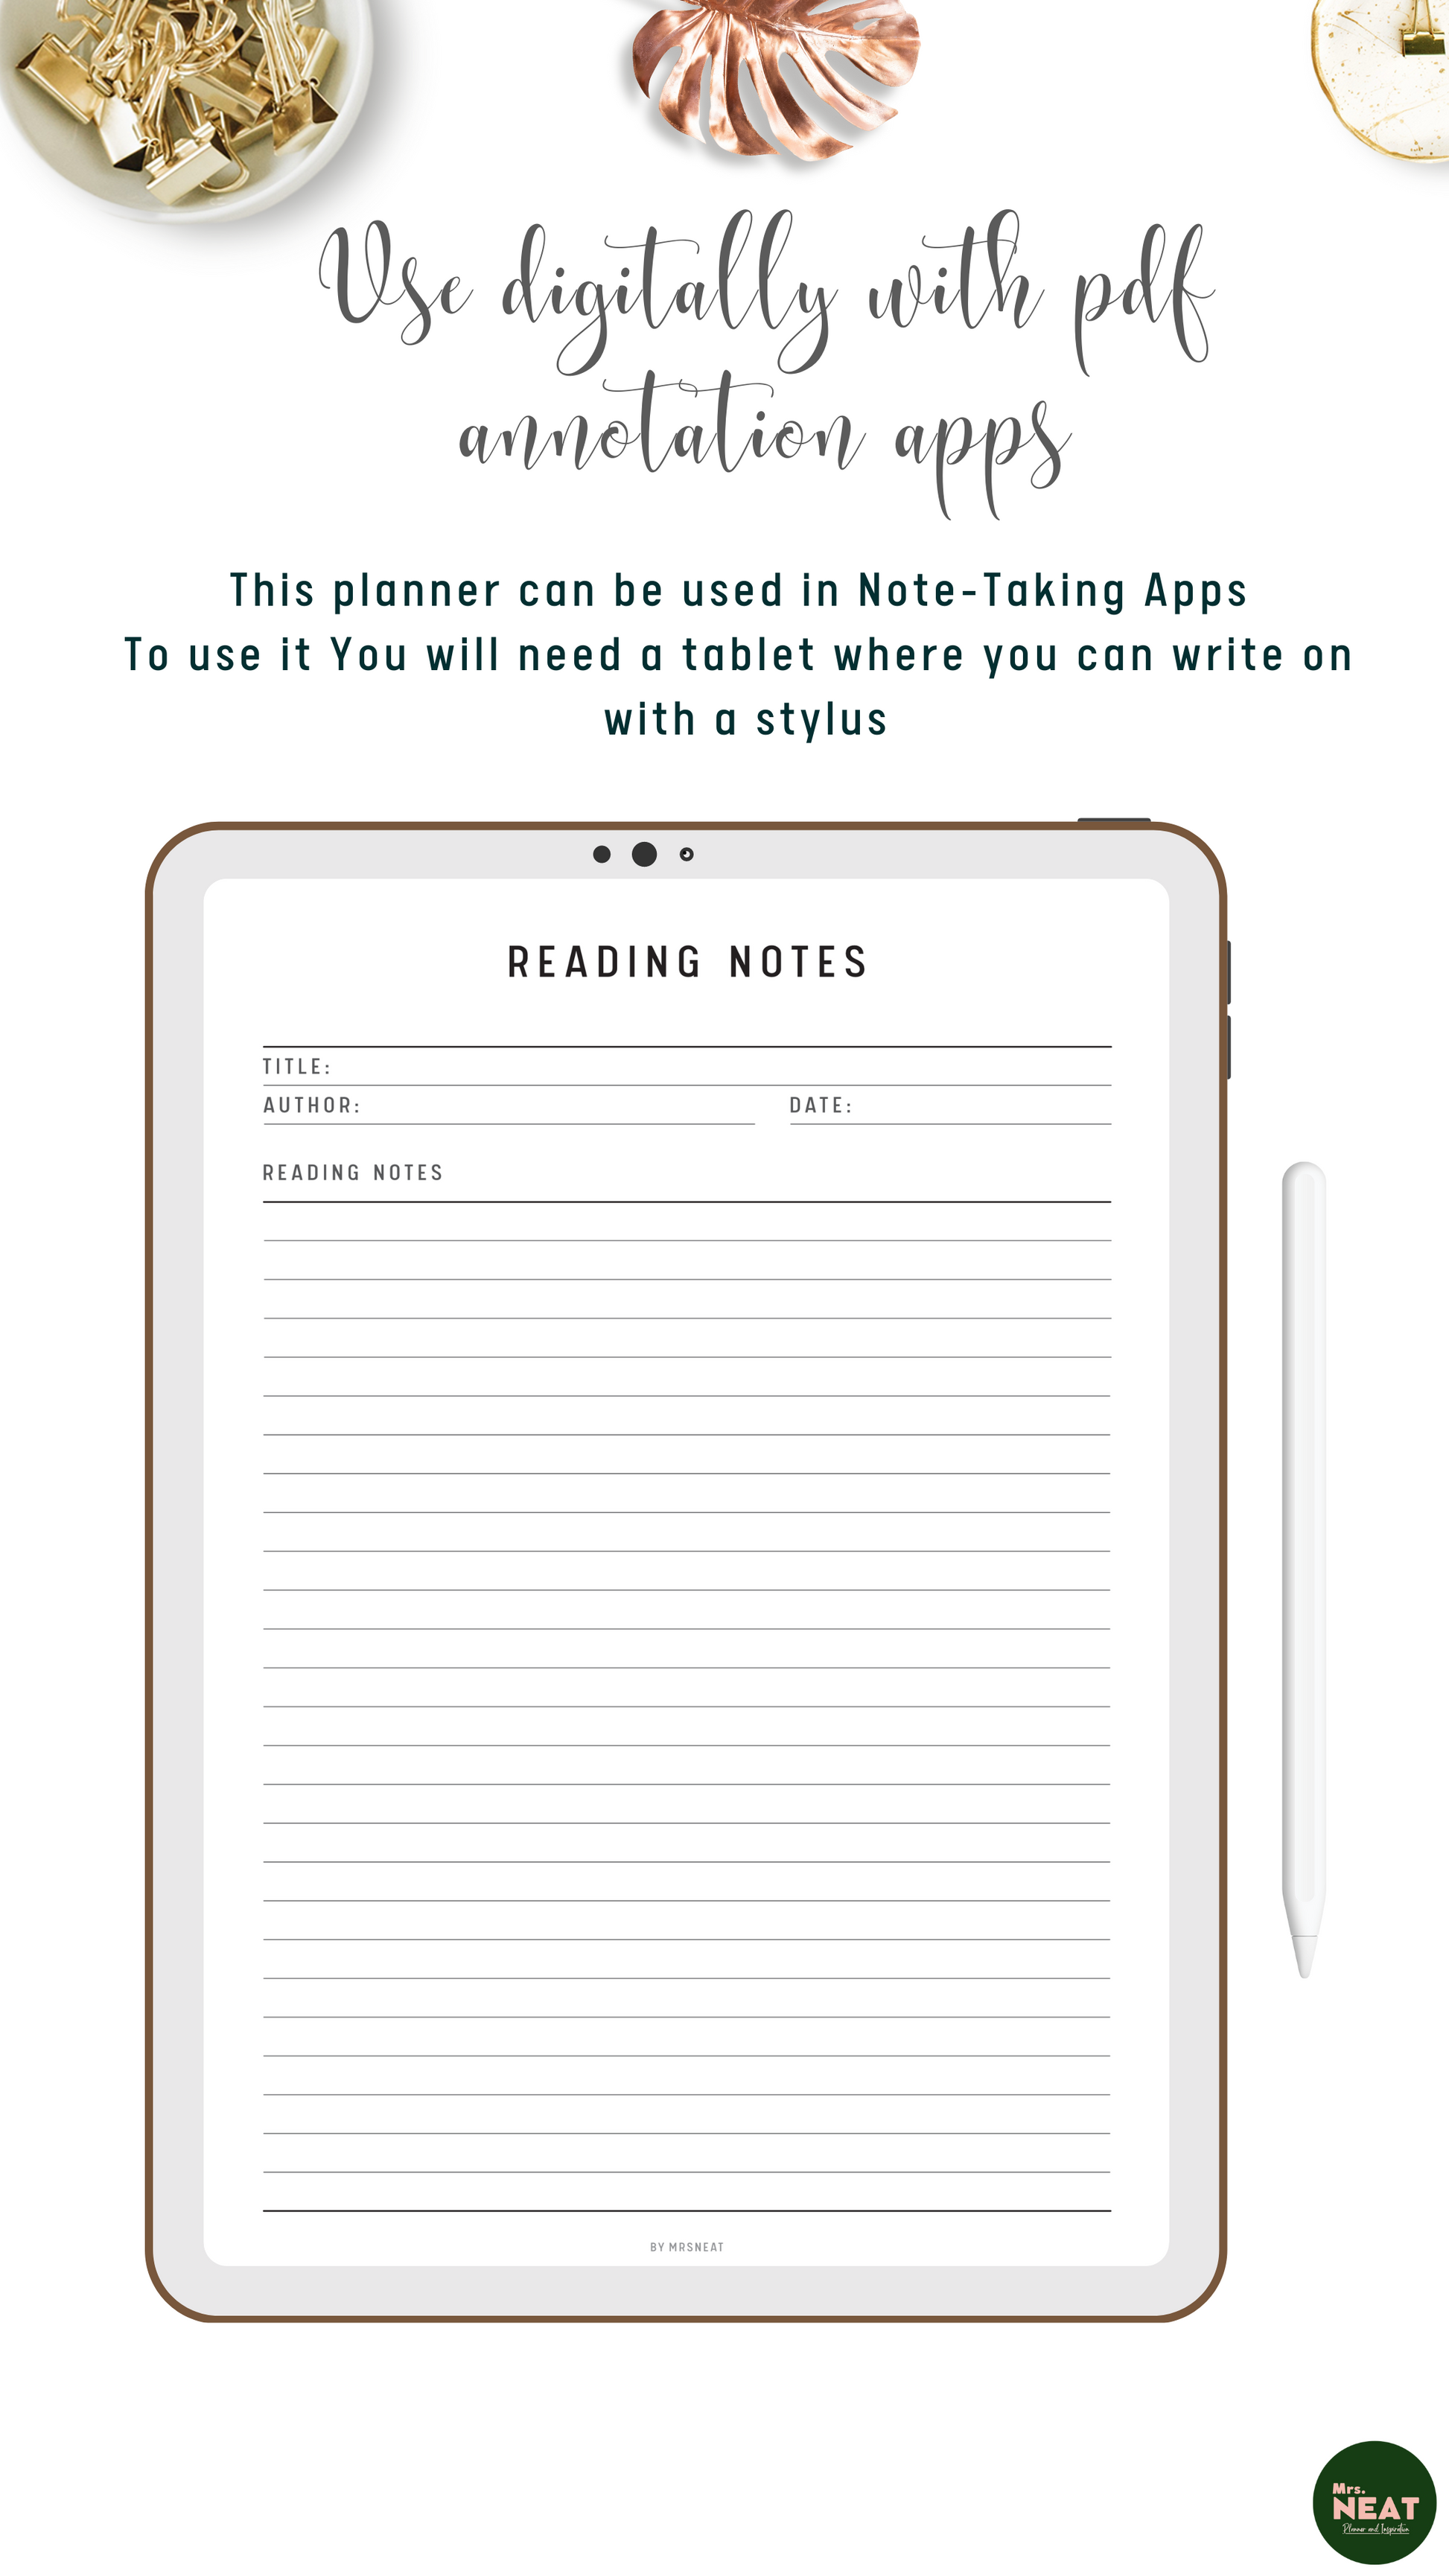 Beautiful and clean Reading Notes Planner use digitally on tablet and stylus with pdf annotation apps